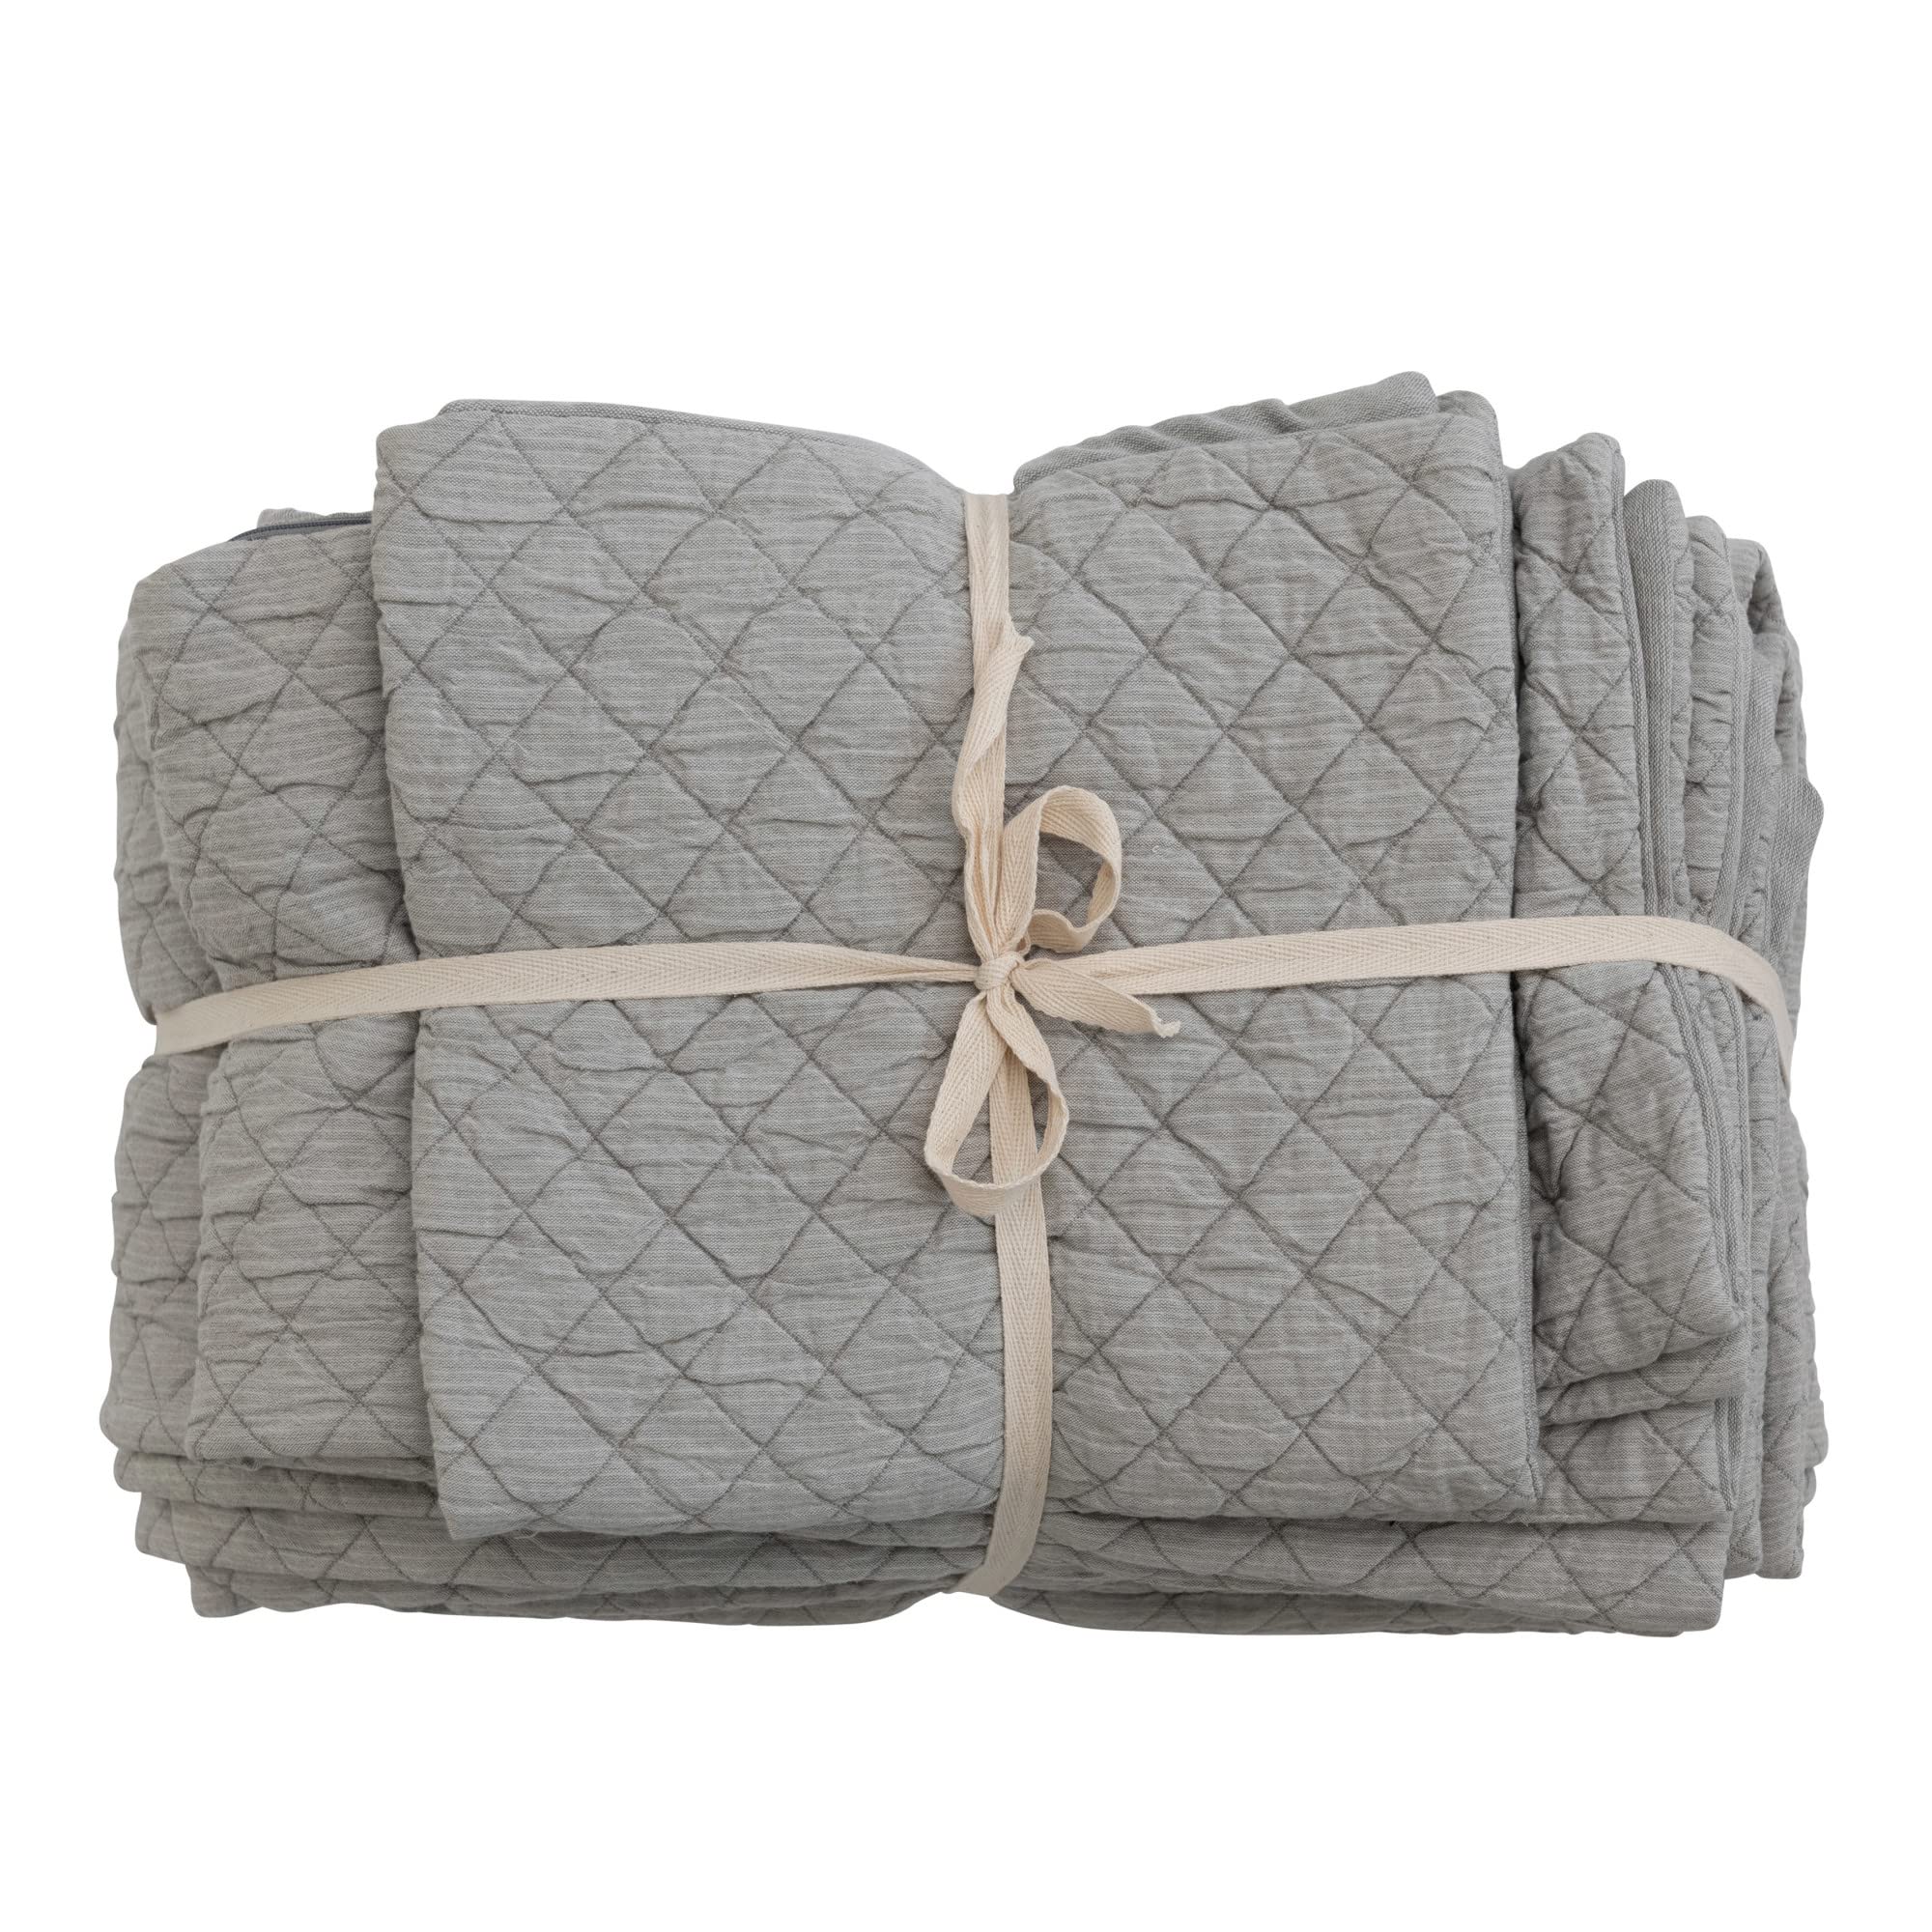 Creative Co-Op Woven Cotton Quilted Jacquard Cover with 2 King Shams Set of 3 Grey Textiles Bedding 118 L x 90 W x 1 H